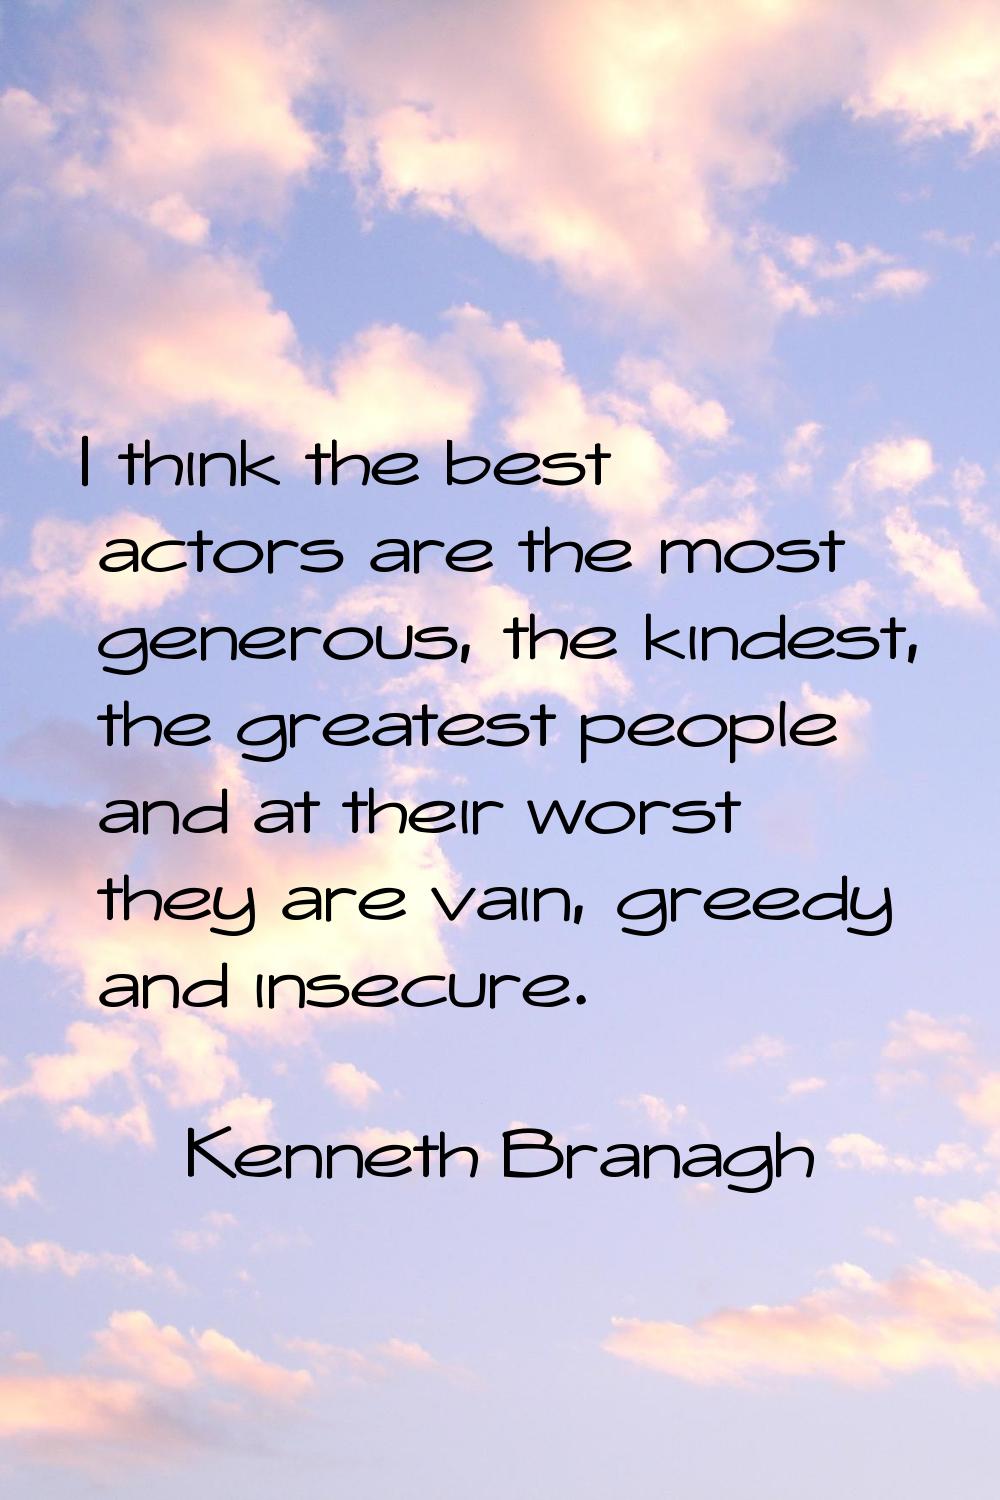 I think the best actors are the most generous, the kindest, the greatest people and at their worst 